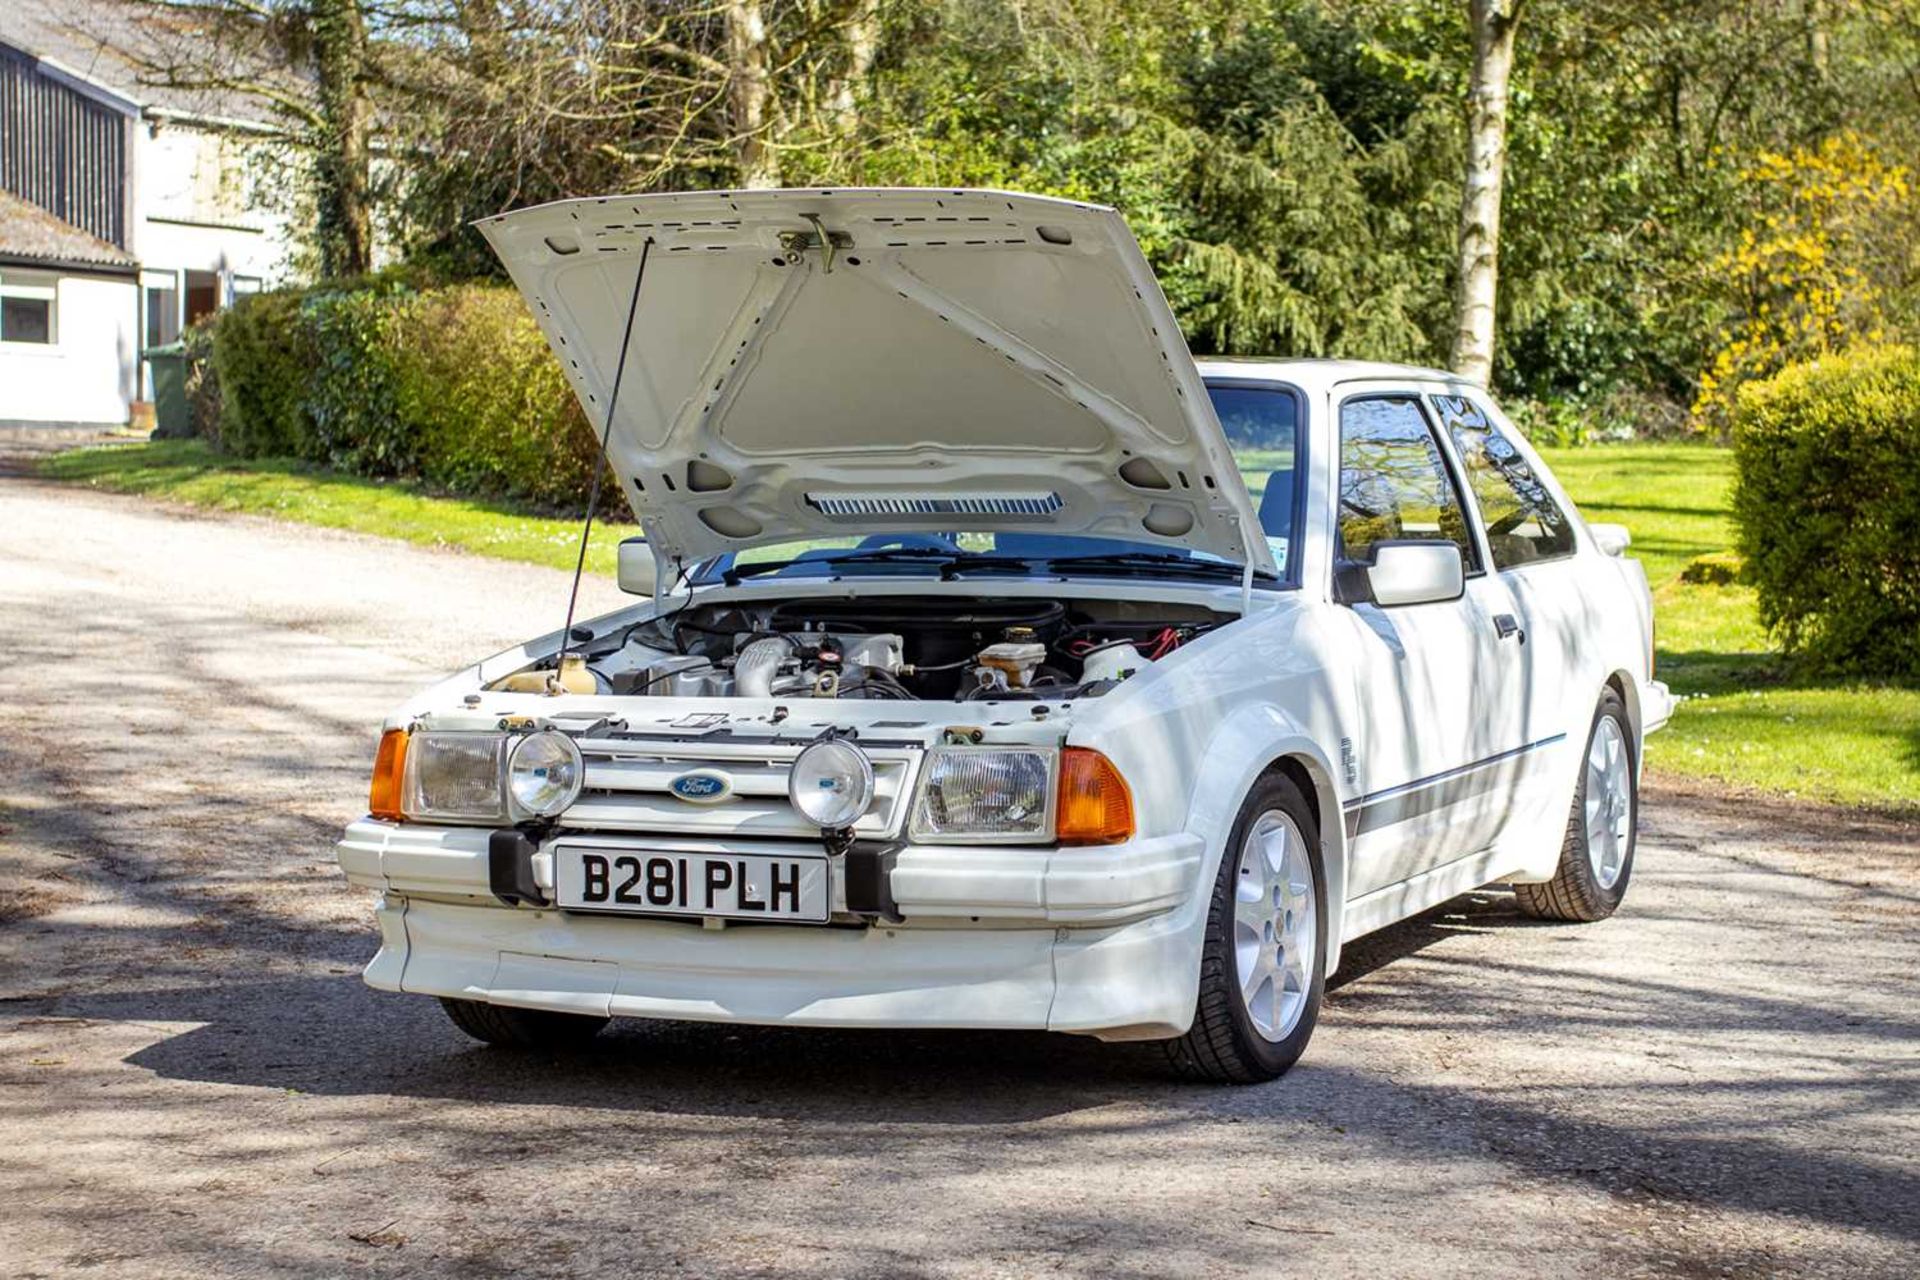 1985 Ford Escort RS Turbo S1 Subject to a full restoration  - Image 18 of 76